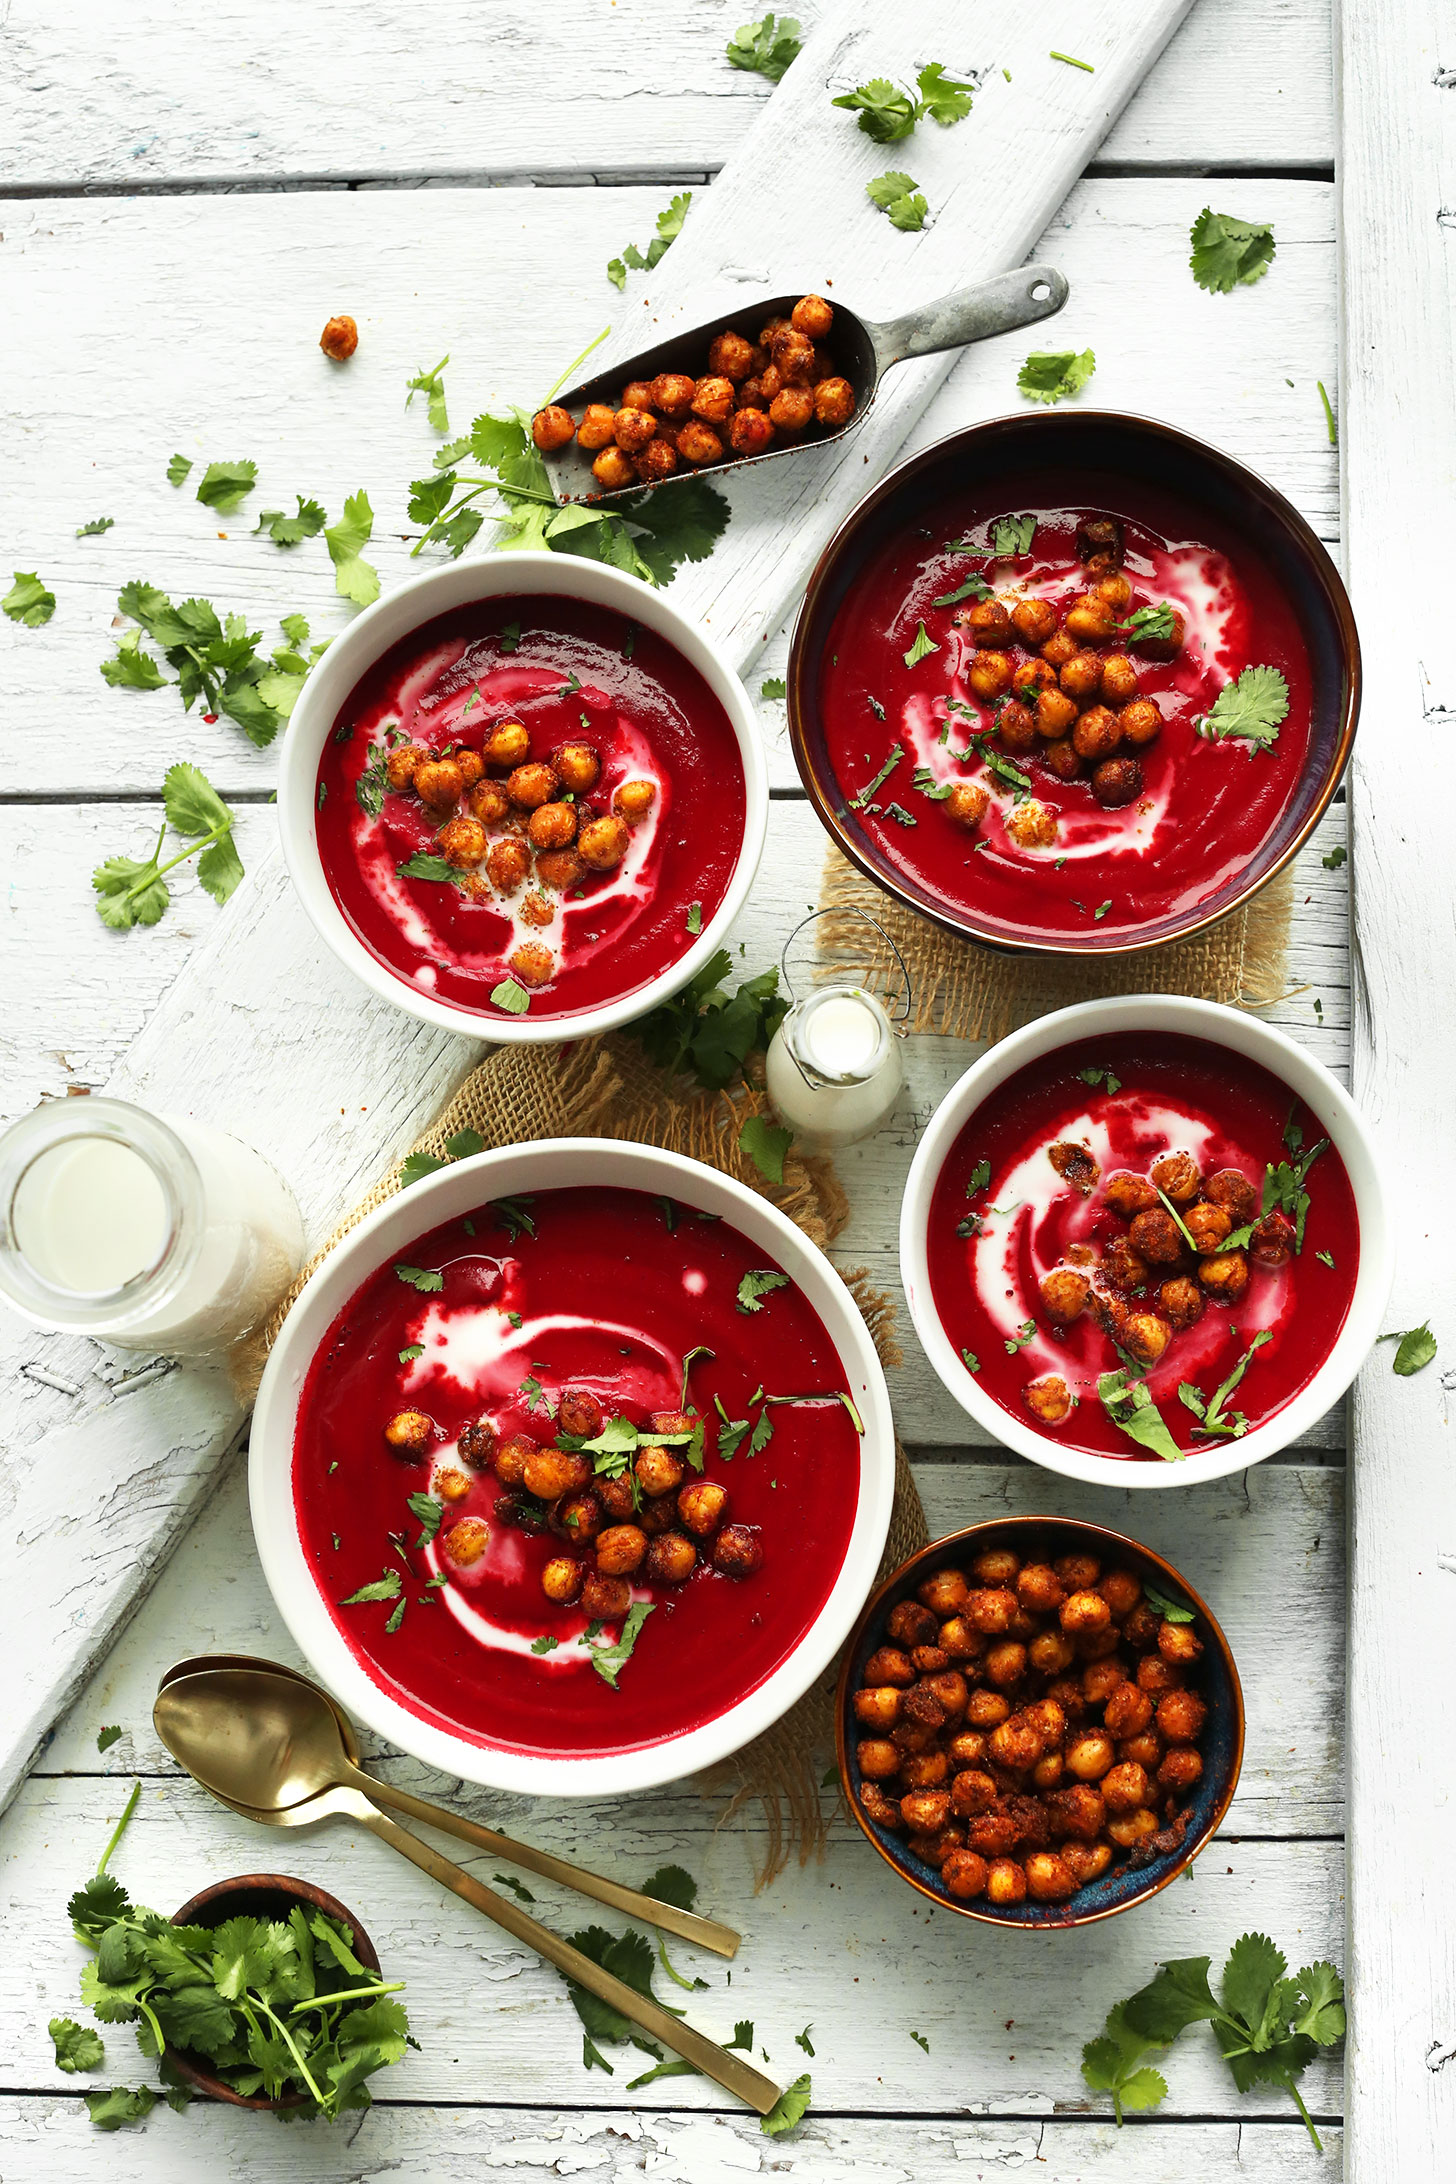 Bowls of our vegan Curried Beet Soup topped with Crispy Tandoori Chickpeas and cilantro